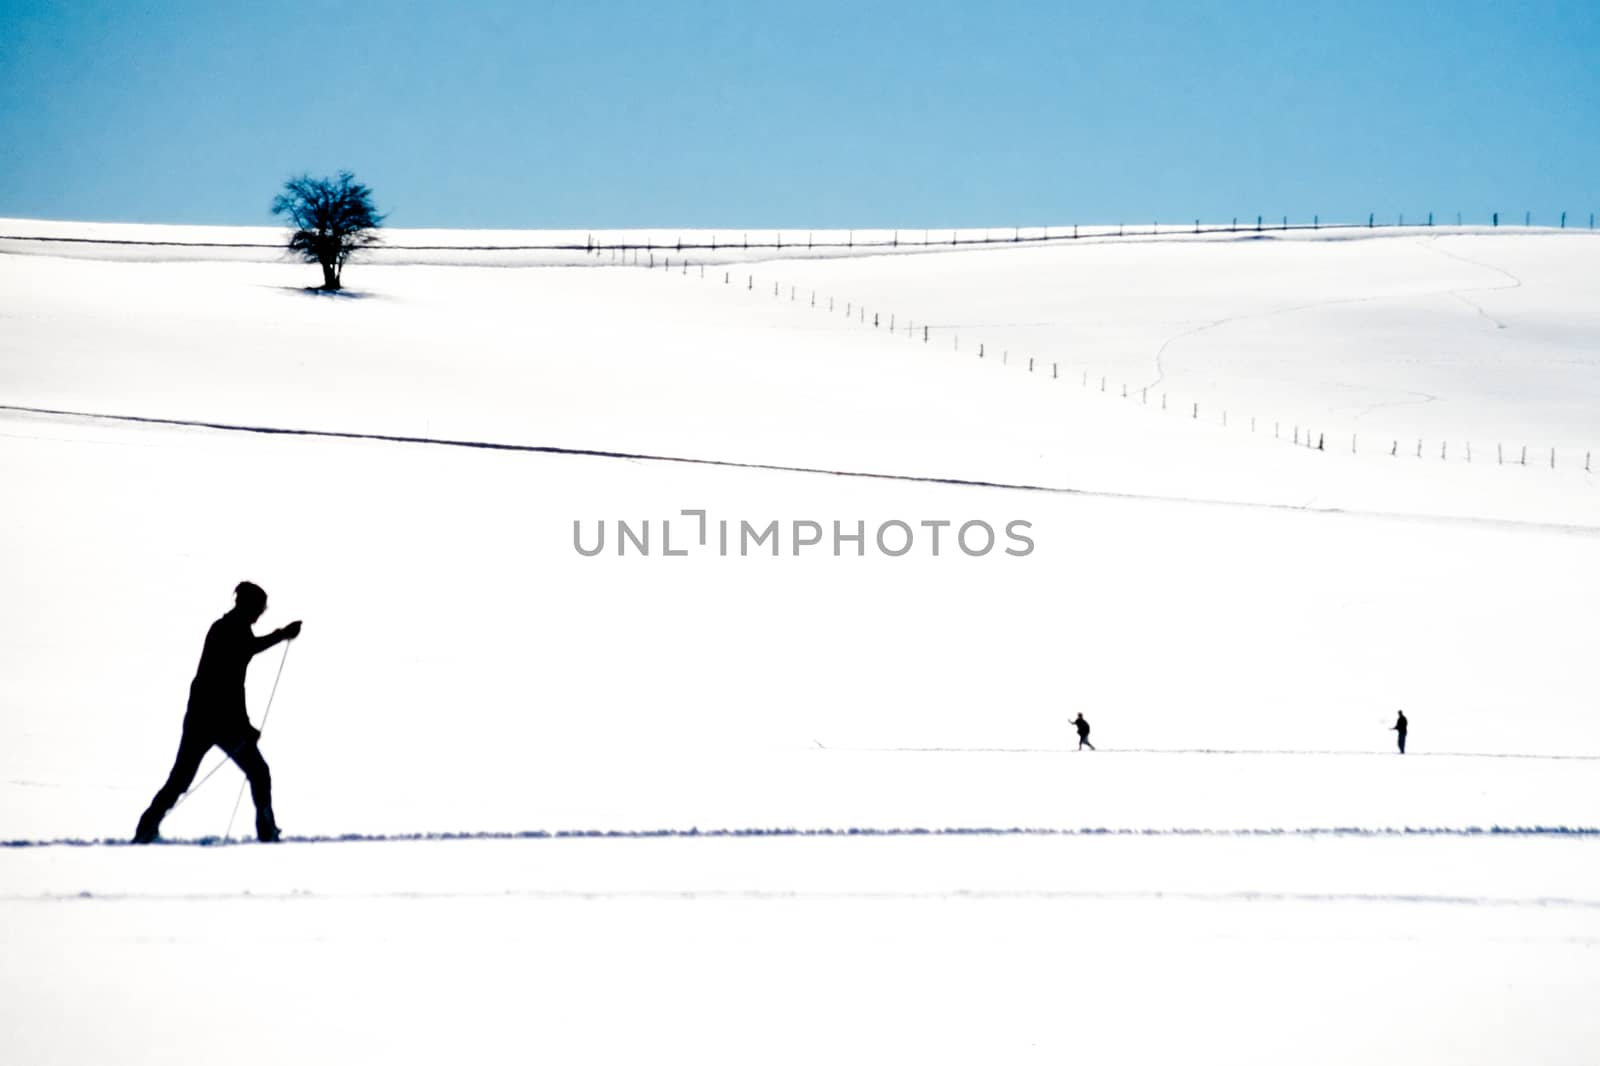 Cross country skier skiing open expanse of snow by PiLens